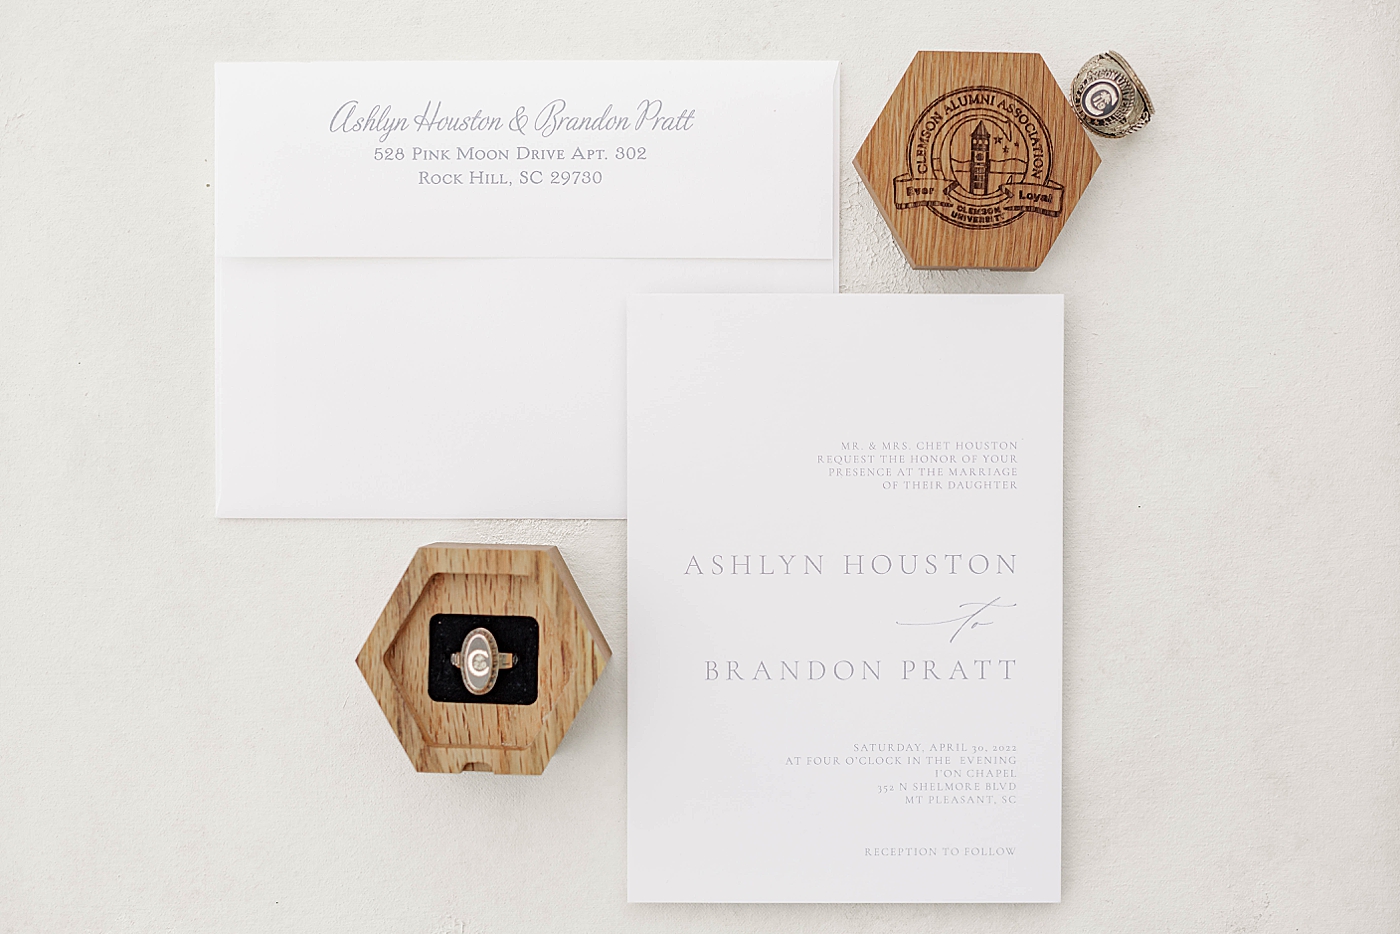 Wedding invitation with Clemson rings | Carters Event Co